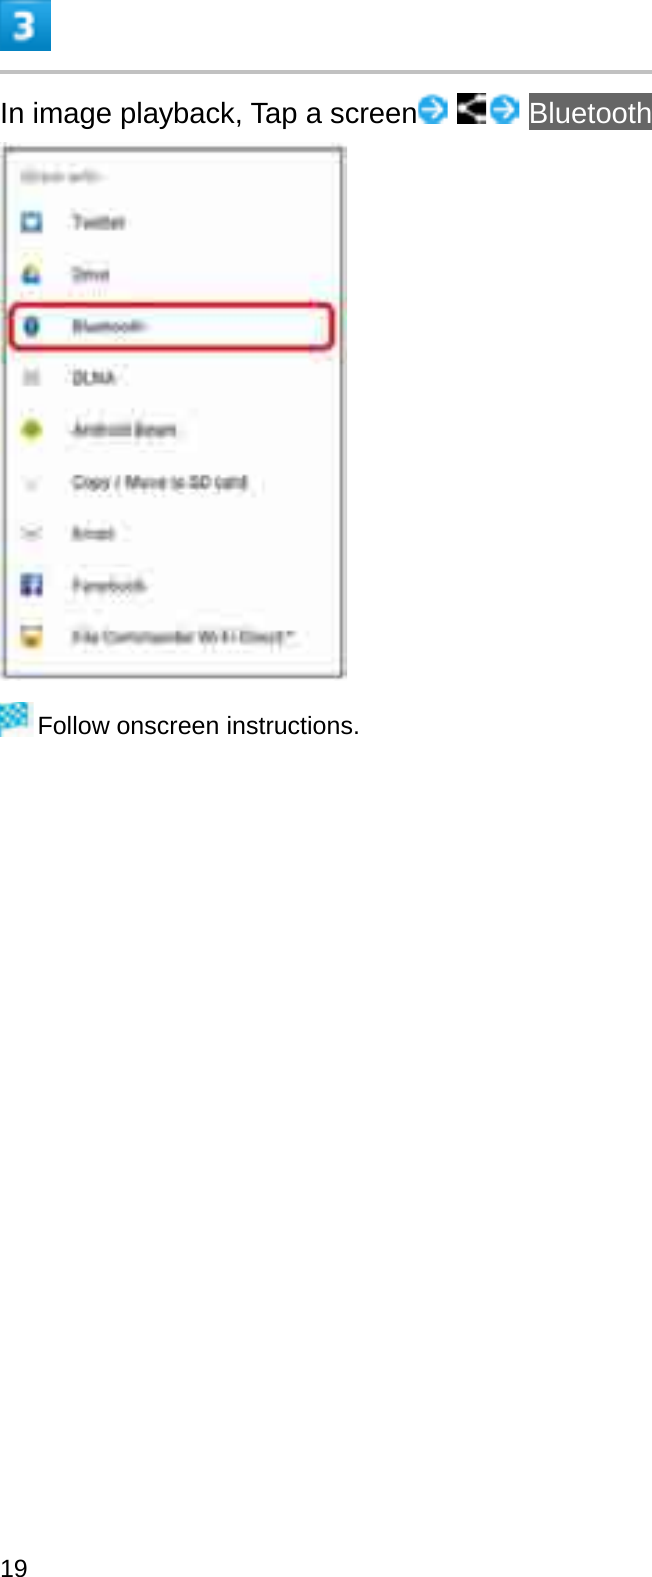 In image playback, Tap a screen BluetoothFollow onscreen instructions.19